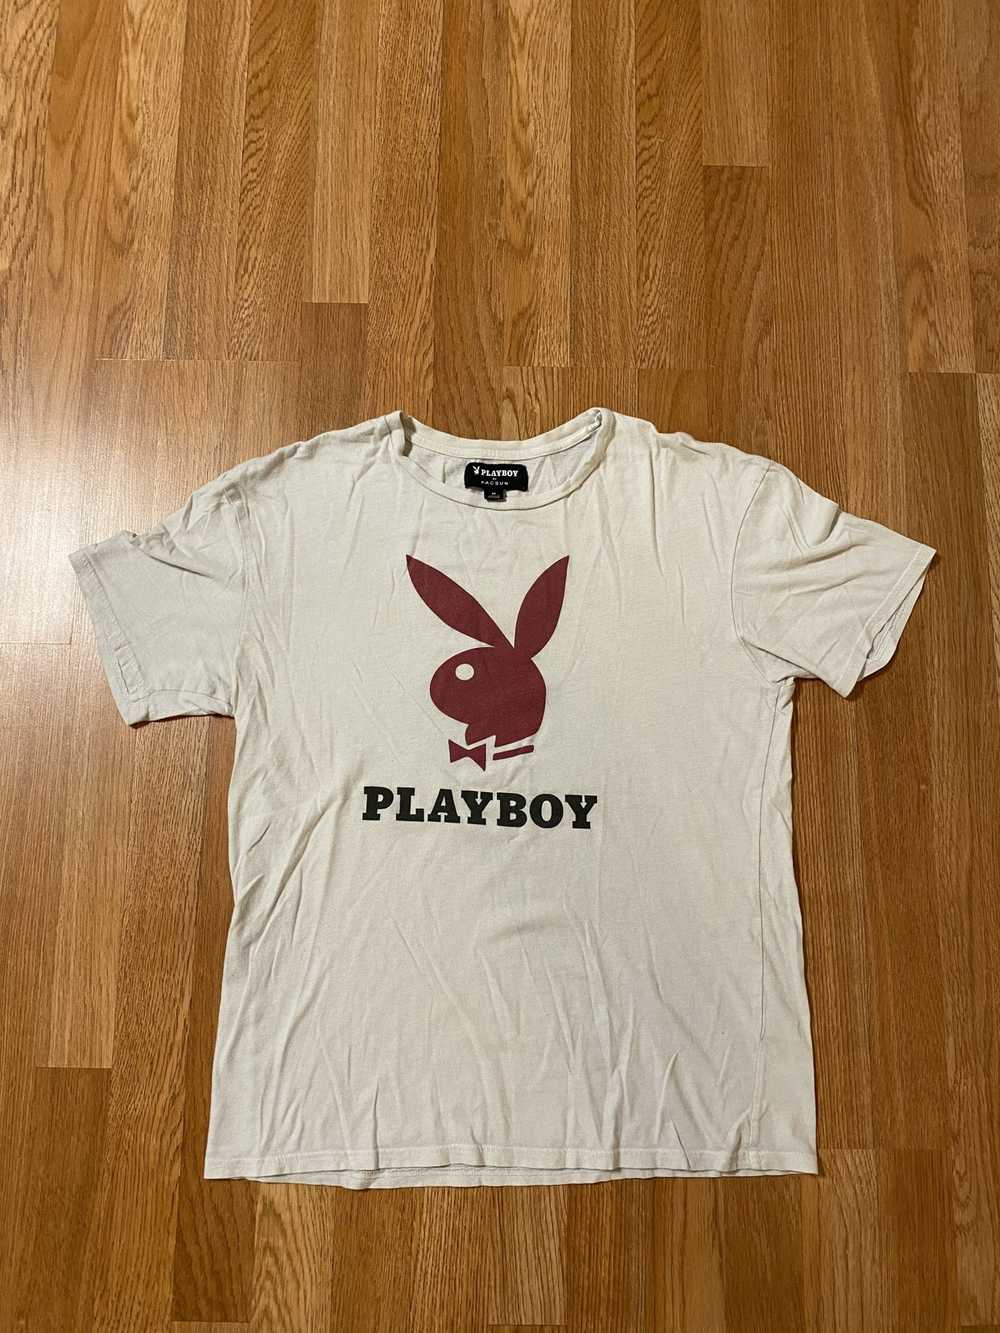 Pacsun Playboy Graphic Tee - image 1